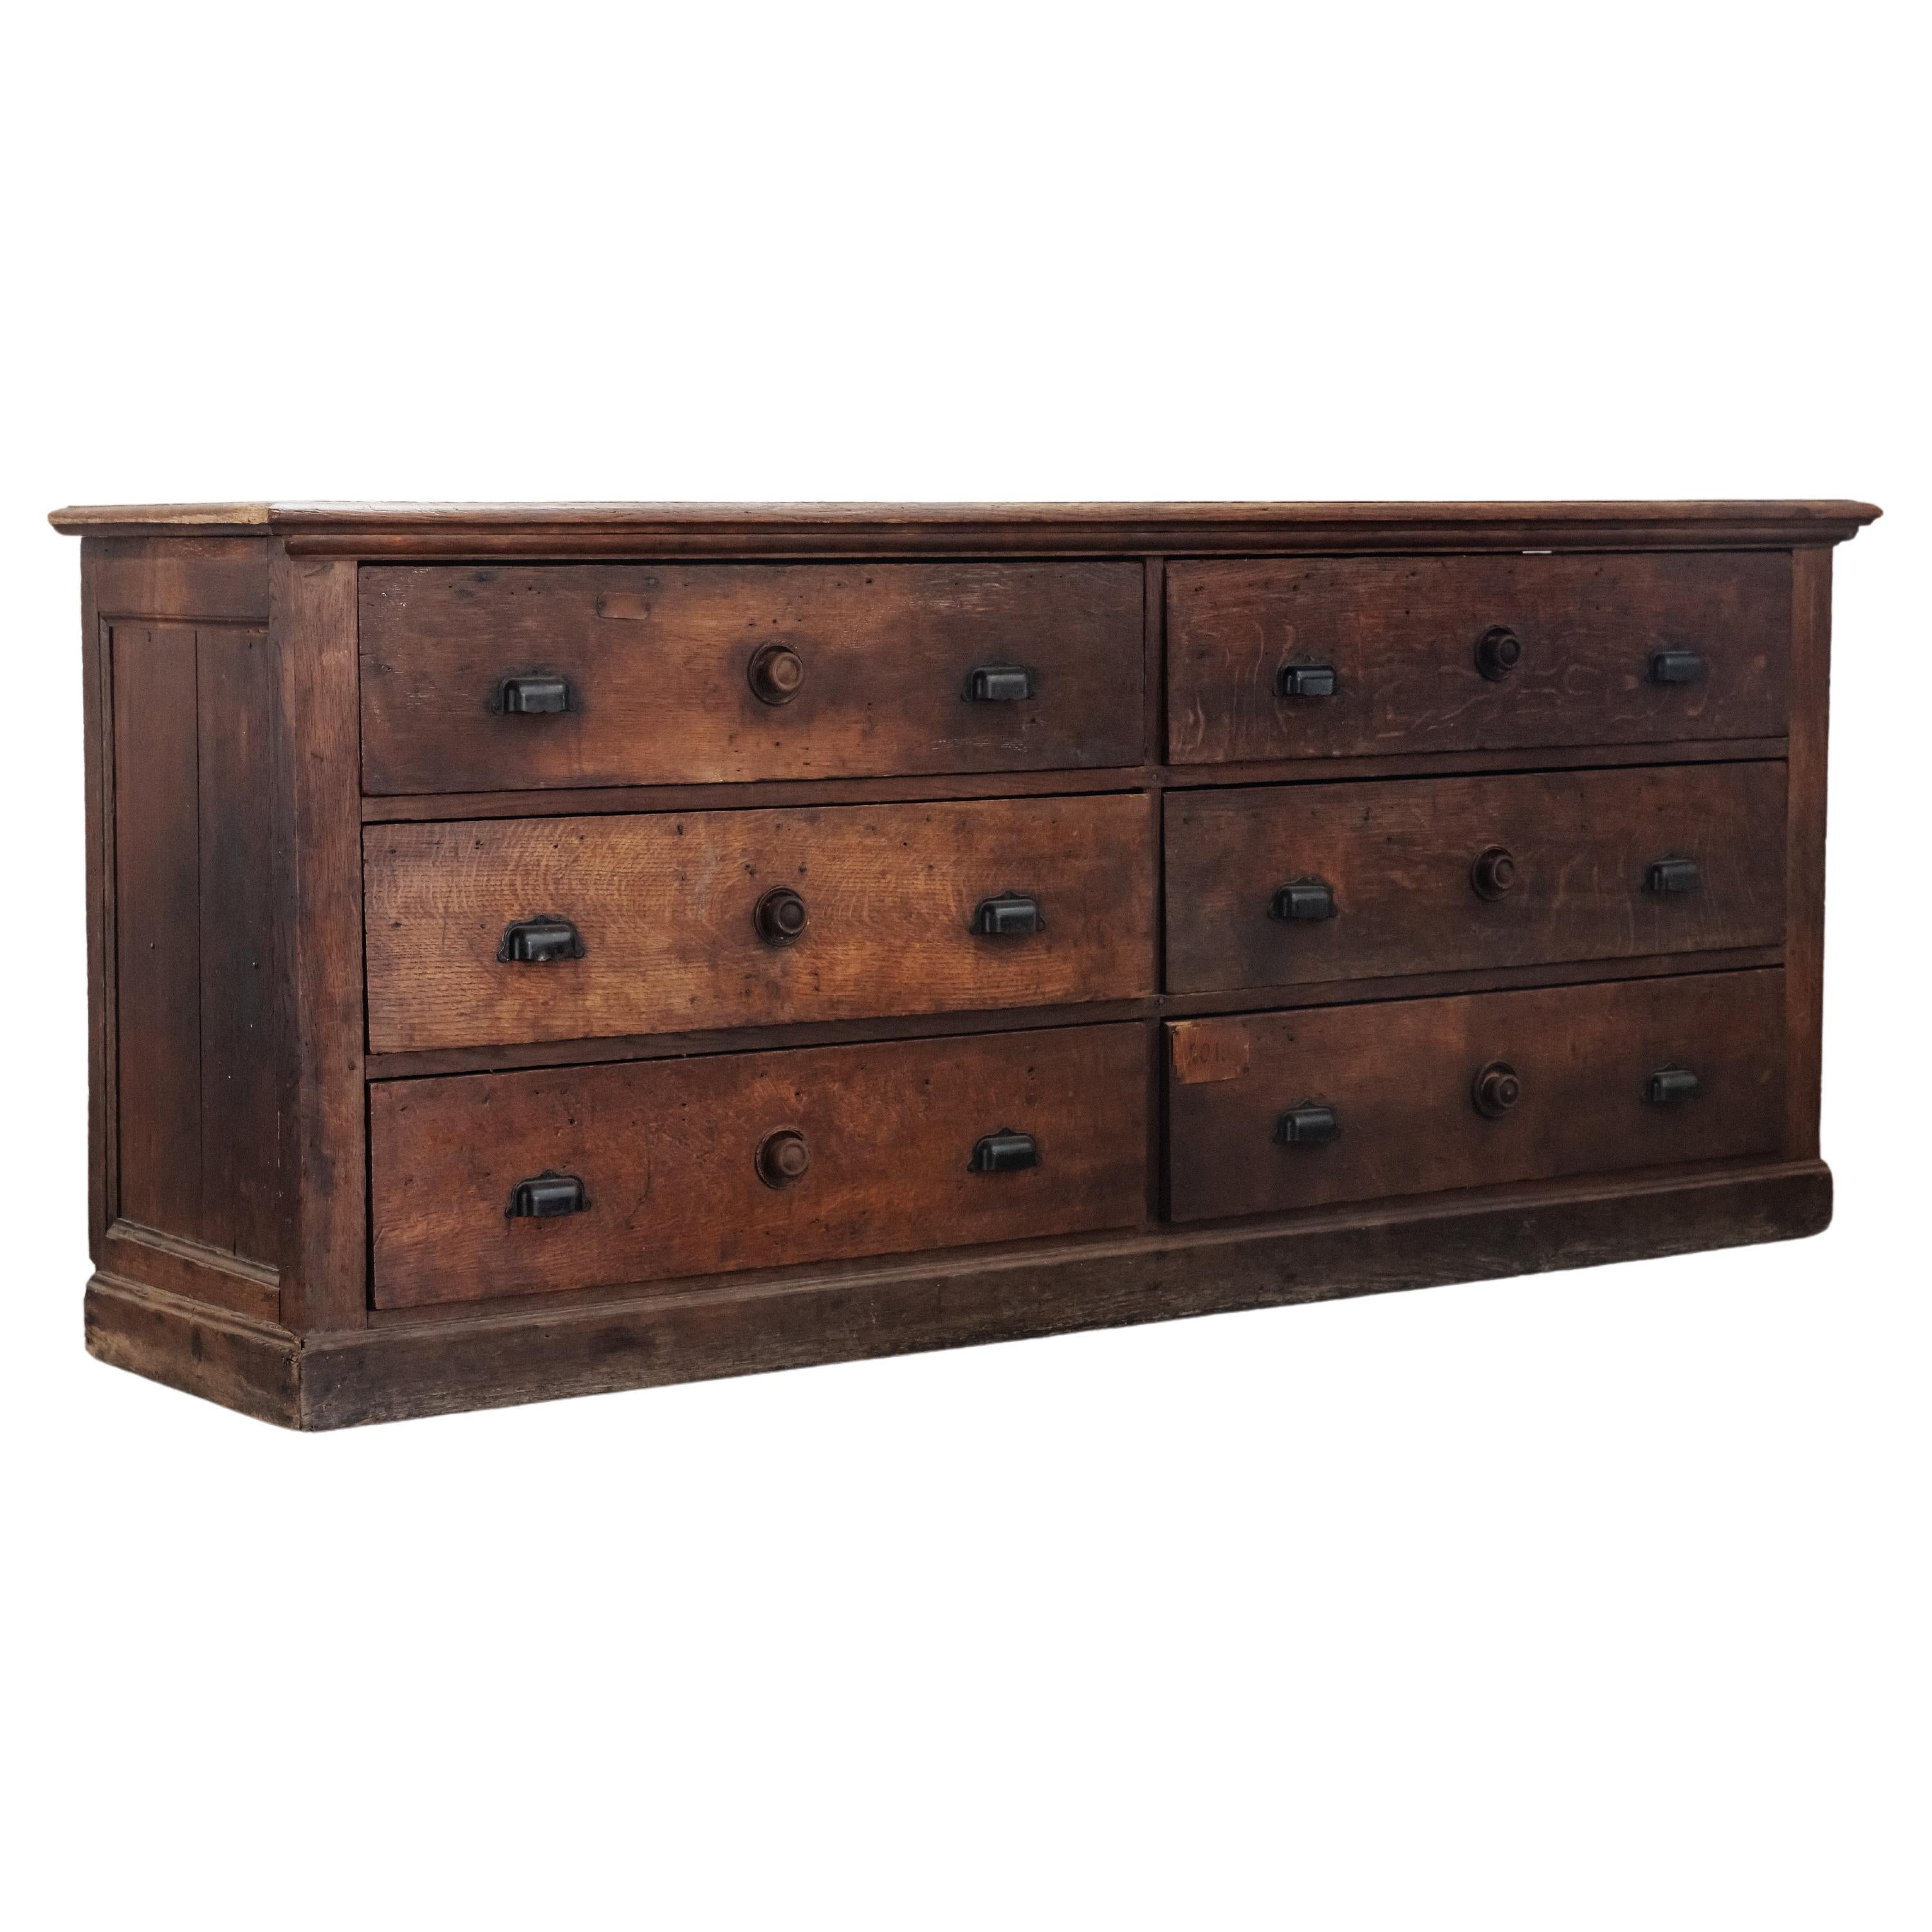 Early Oak Shop Commode From France, Circa 1900 For Sale